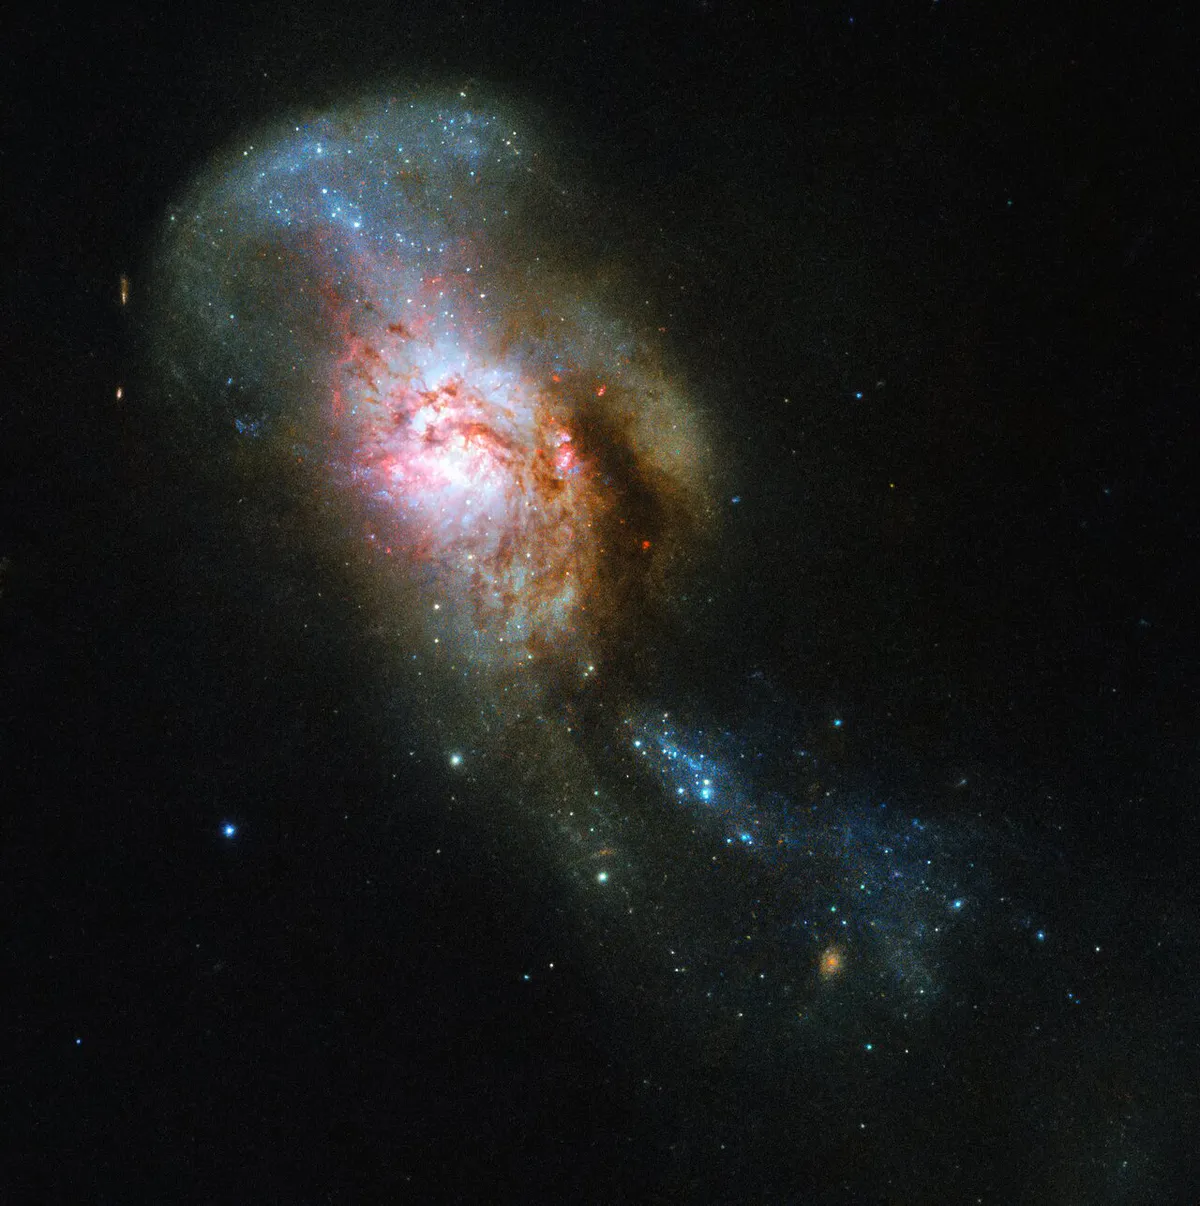 This galactic merger is known as the Medusa merger, as it supposedly looks like the writhing snakes that form the Greek Gorgon’s hair. Astronomers think that in the case of NGC 4194, to give it its formal name, an early galaxy consumed a smaller gas-rich system, ejecting streams of stars and cosmic dust into space. Credit: ESA/Hubble & NASA, A. Adamo